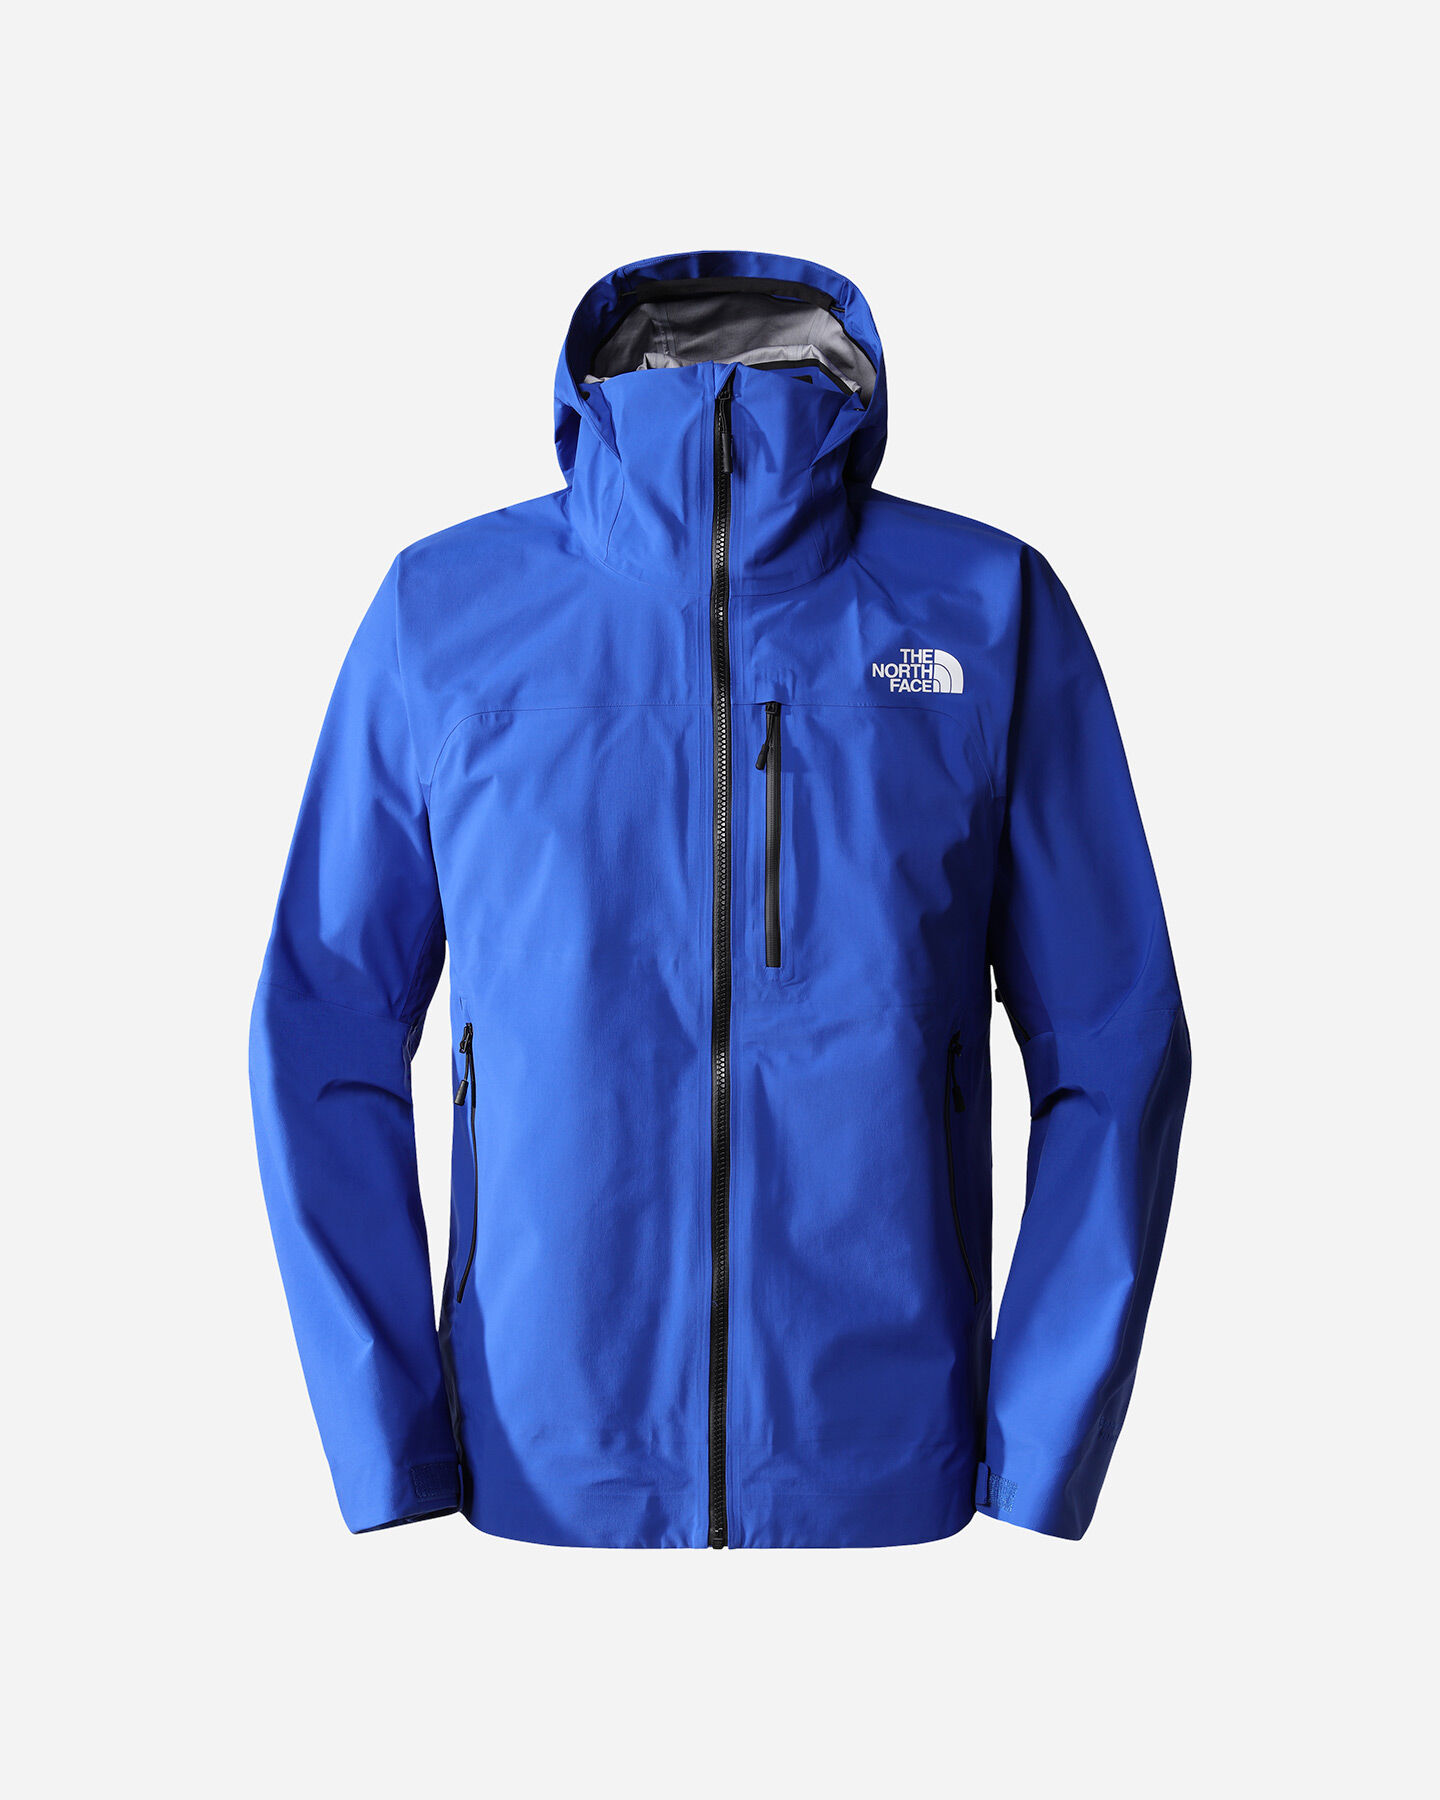  Giacca outdoor THE NORTH FACE SUMMIT TORRE EGGER FUTURELIGHT M S5475494|CZ6|S scatto 0